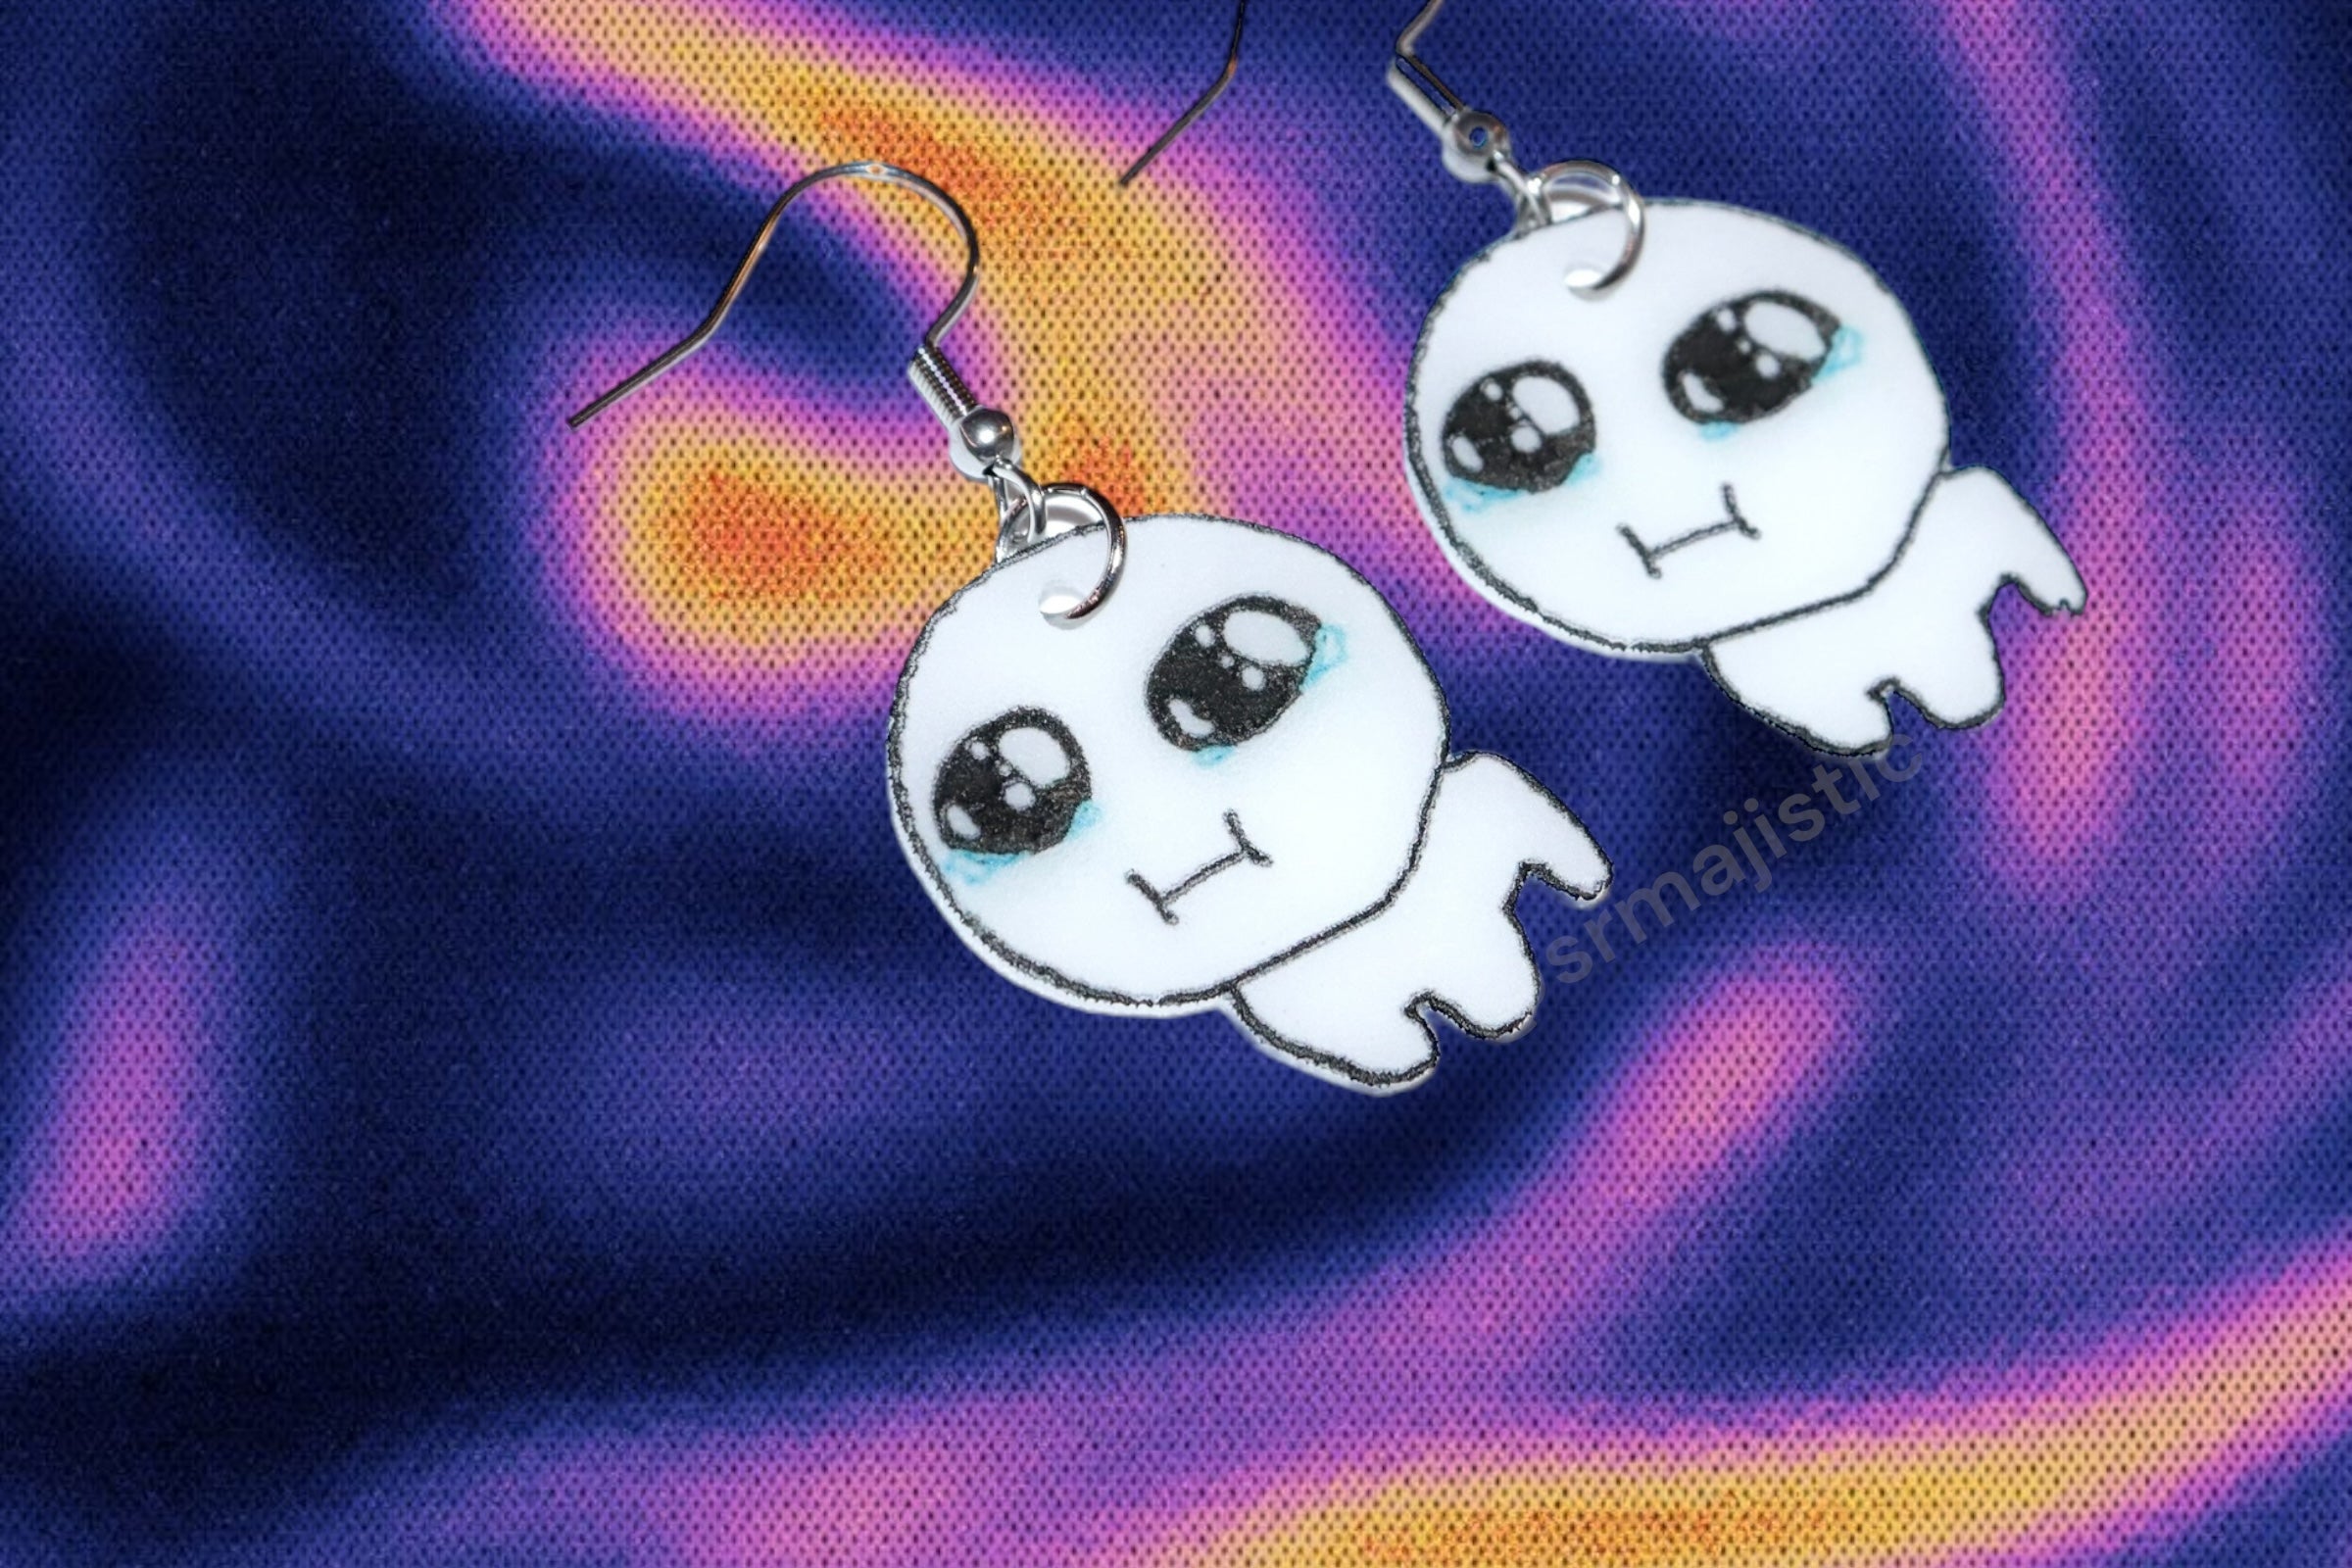 Autism/TBH Creature Crying and Sad Meme Handmade Earrings!